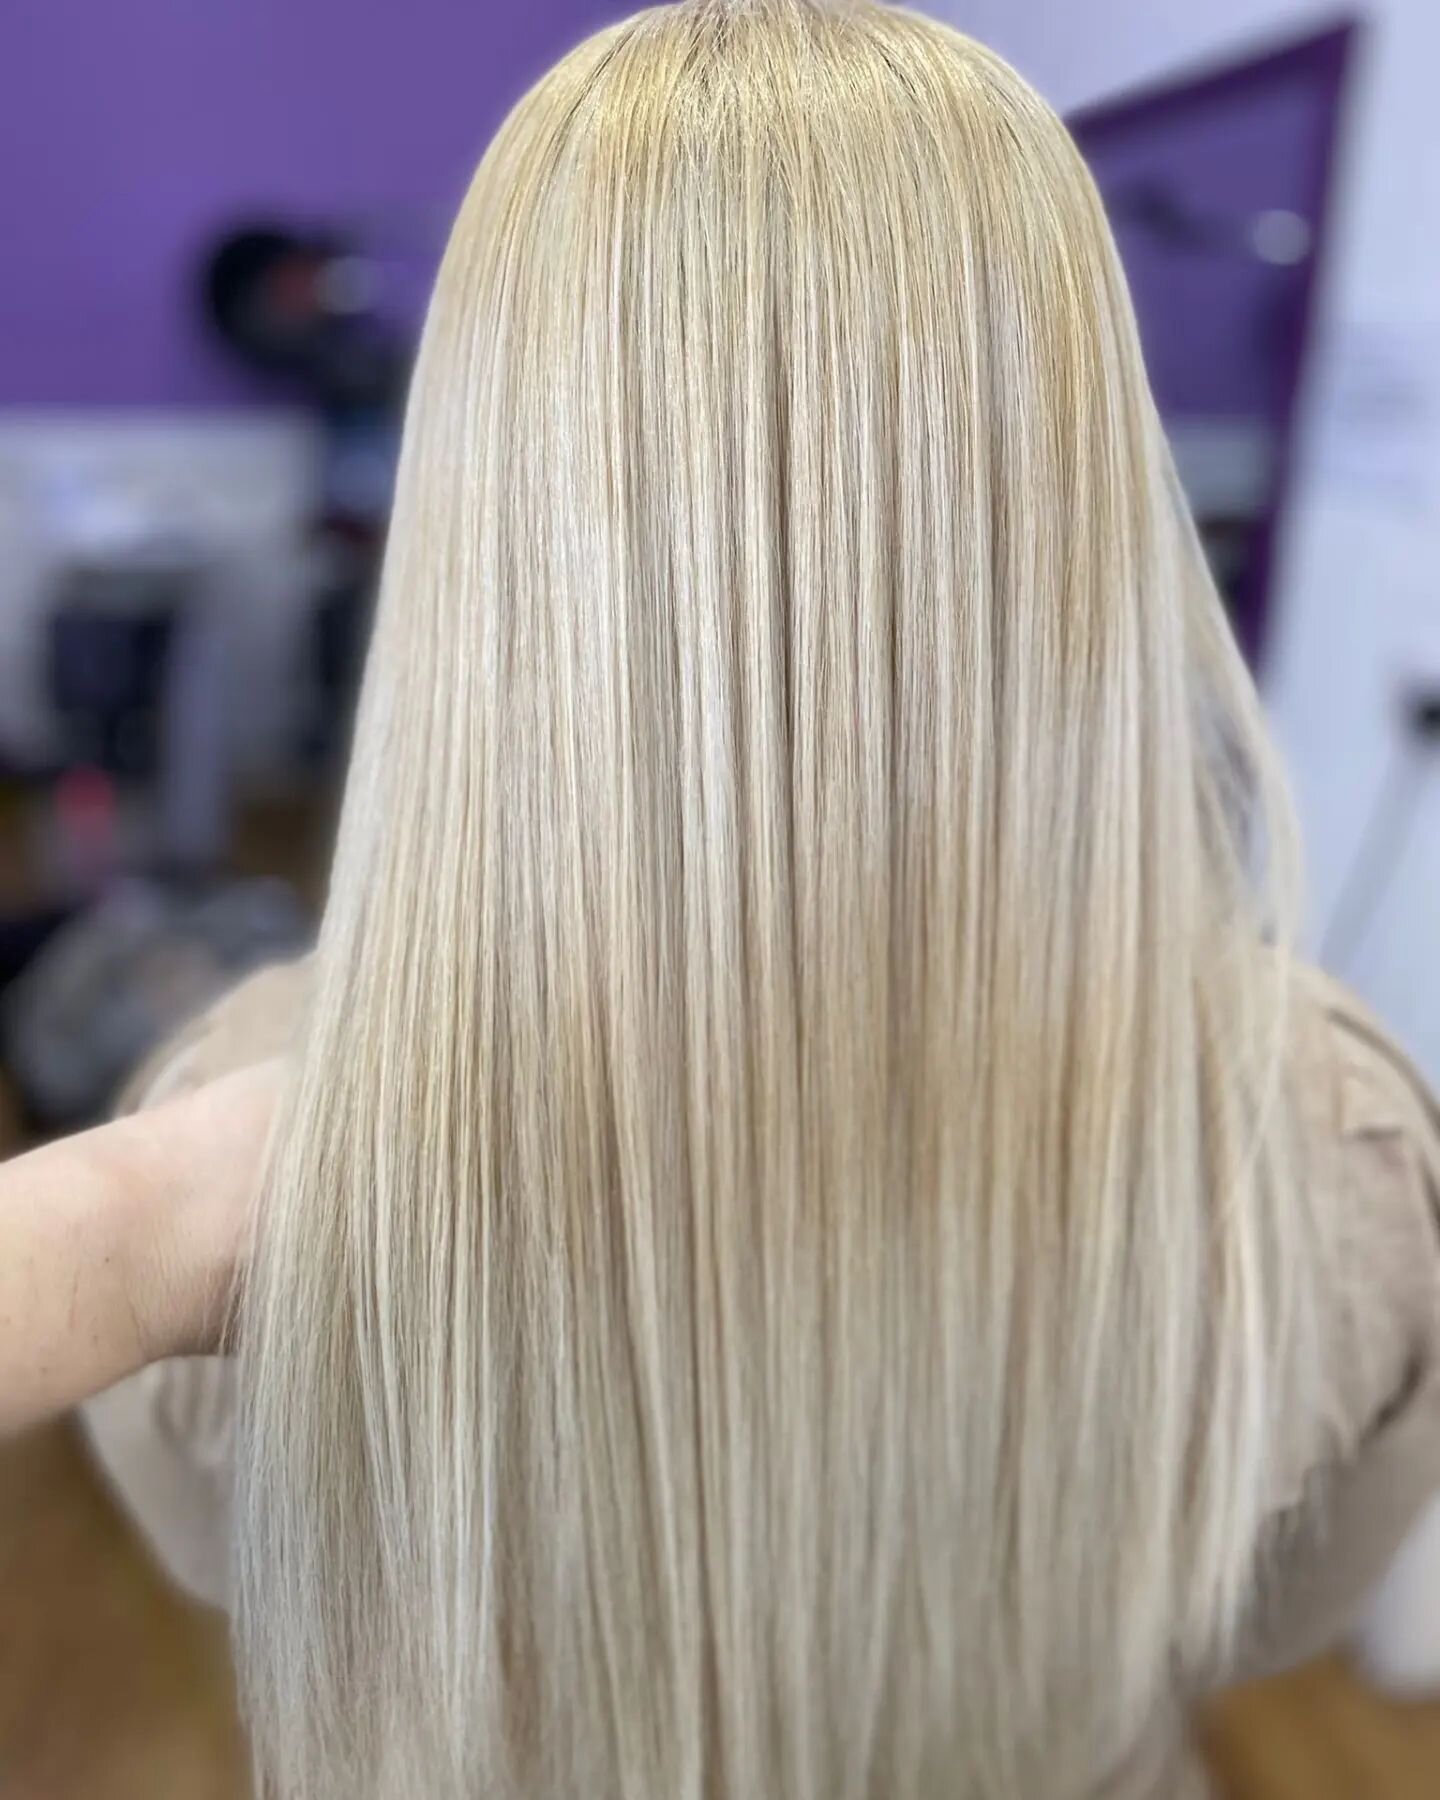 #fullblonde #platiniumhair 🌻 #olaplextreatment #beforeafter ➡️ swipe  for after,🌻